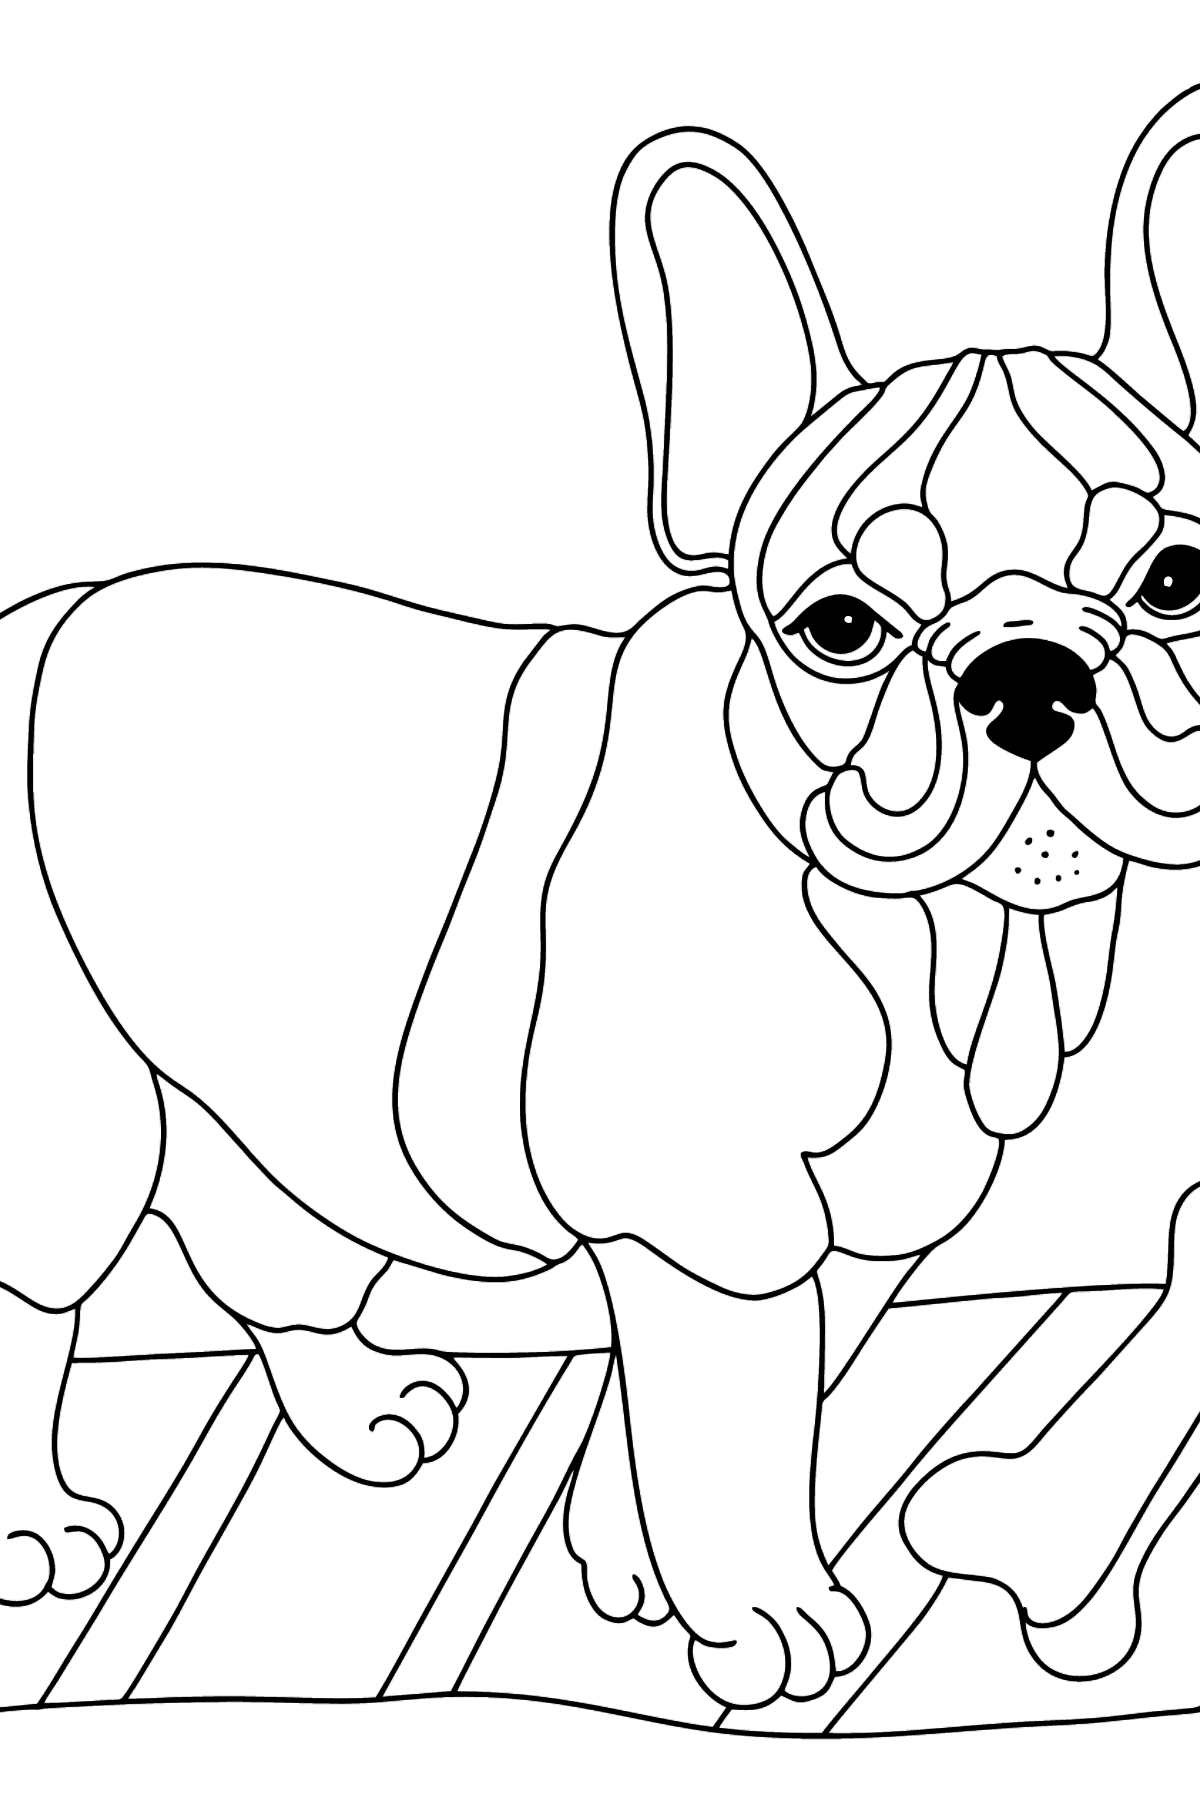 French Bulldog coloring page - Coloring Pages for Kids